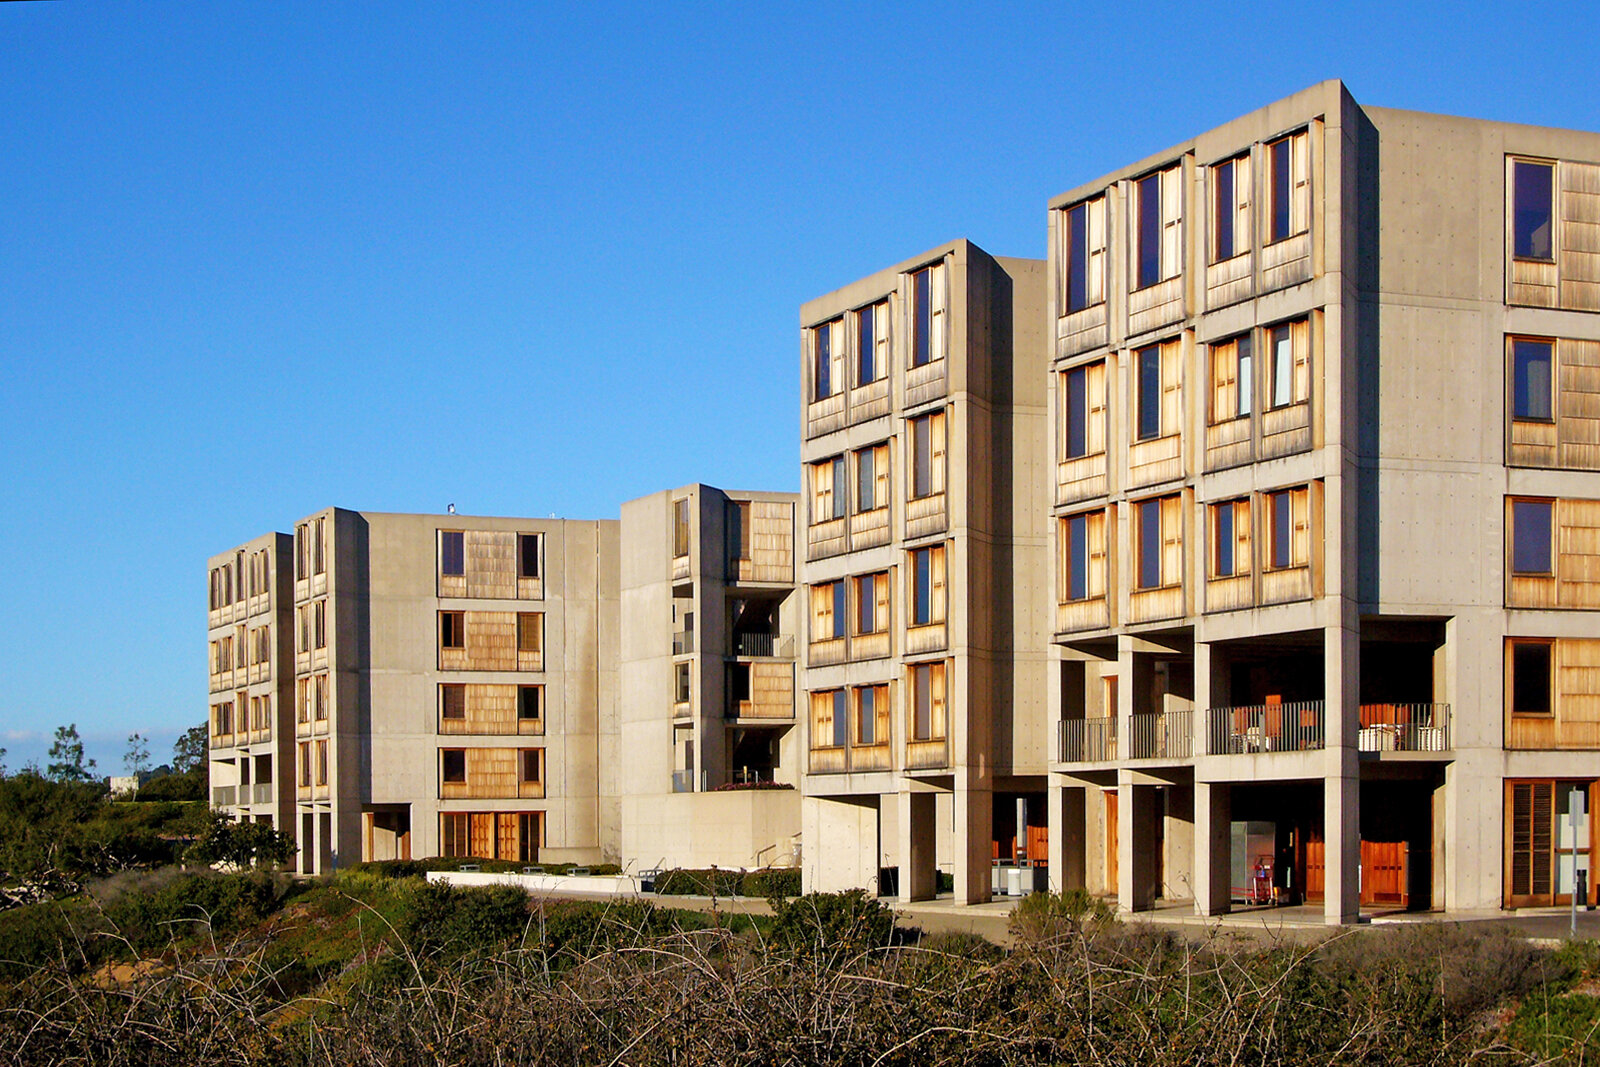 A Masterful Design. Updates to the Salk Institute's iconic…, by Salk  Institute